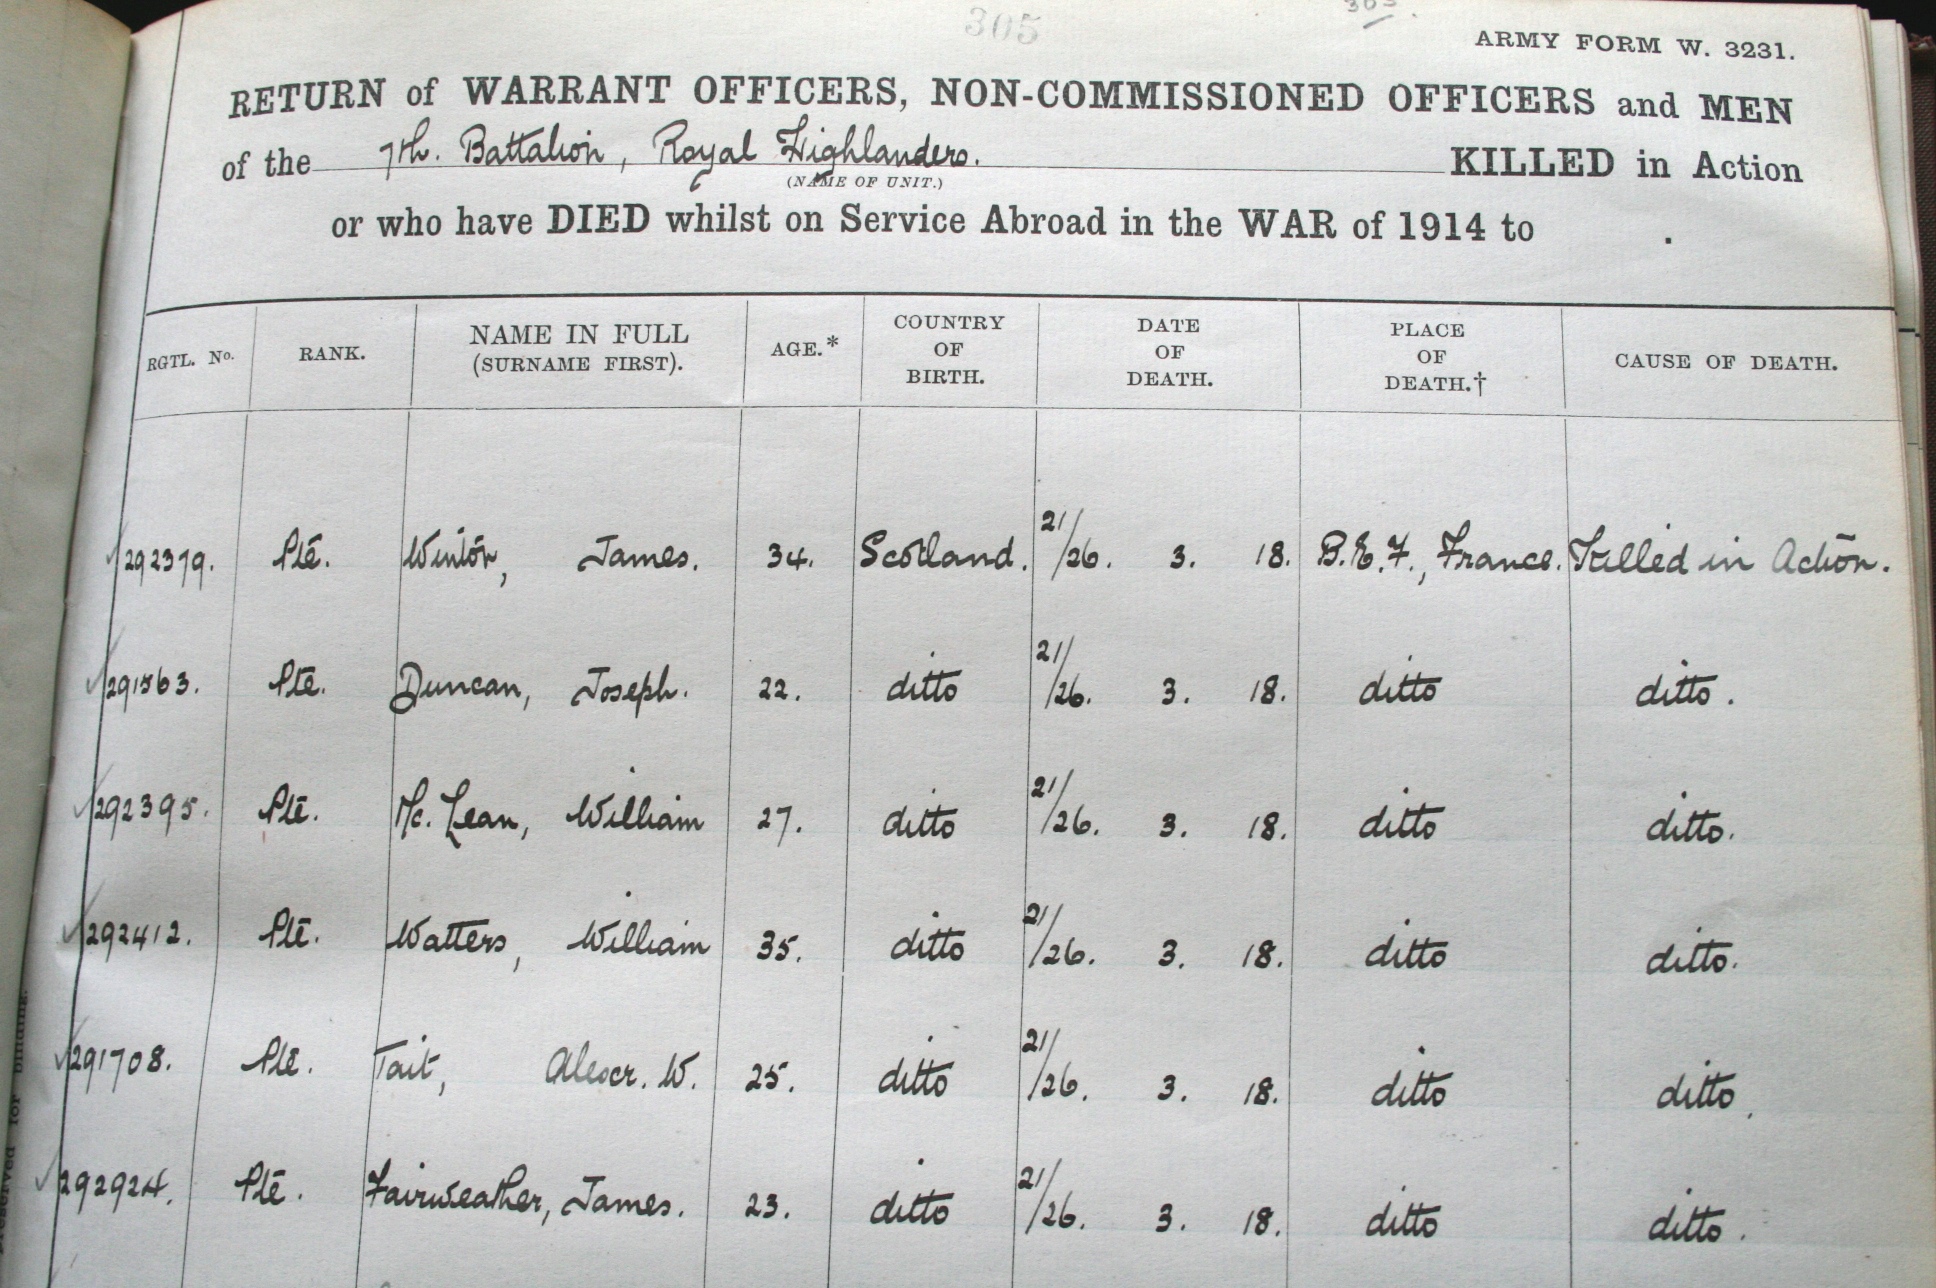 Death of NCOs and other ranks of 1/7th Battalion, Black Watch, 21-26 March 1918